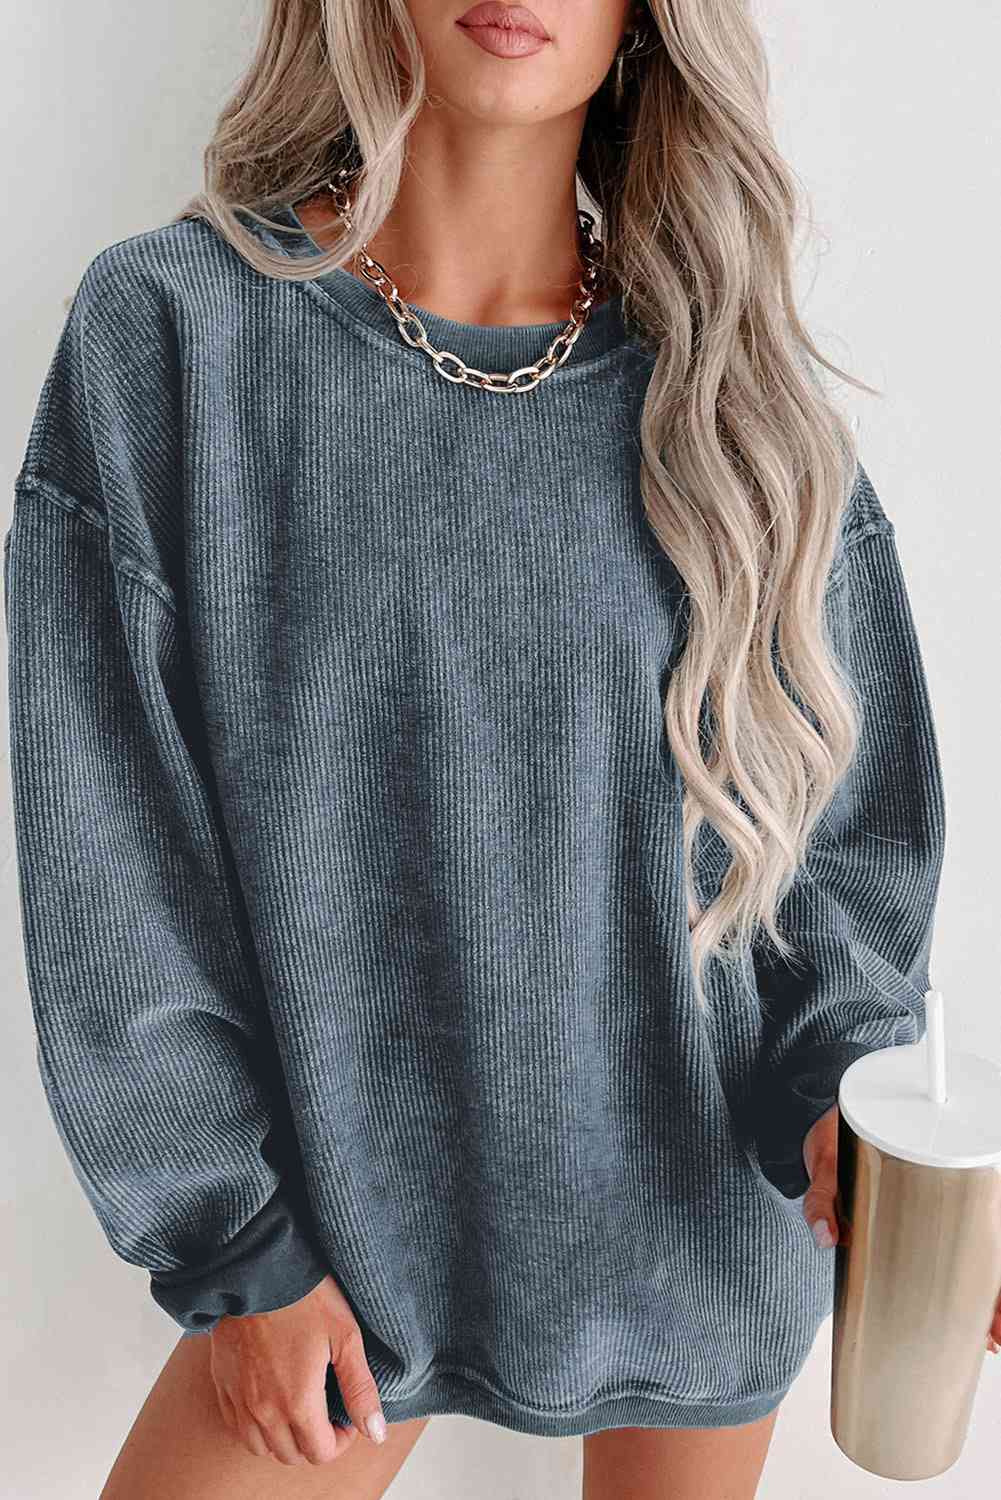 Round Neck Dropped Shoulder Sweatshirt - sweatshirt - Wild Willows Boutique - Massapequa, NY, affordable and fashionable clothing for women of all ages. Bottoms, tops, dresses, intimates, outerwear, sweater, shoes, accessories, jewelry, active wear, and more // Wild Willow Boutique.